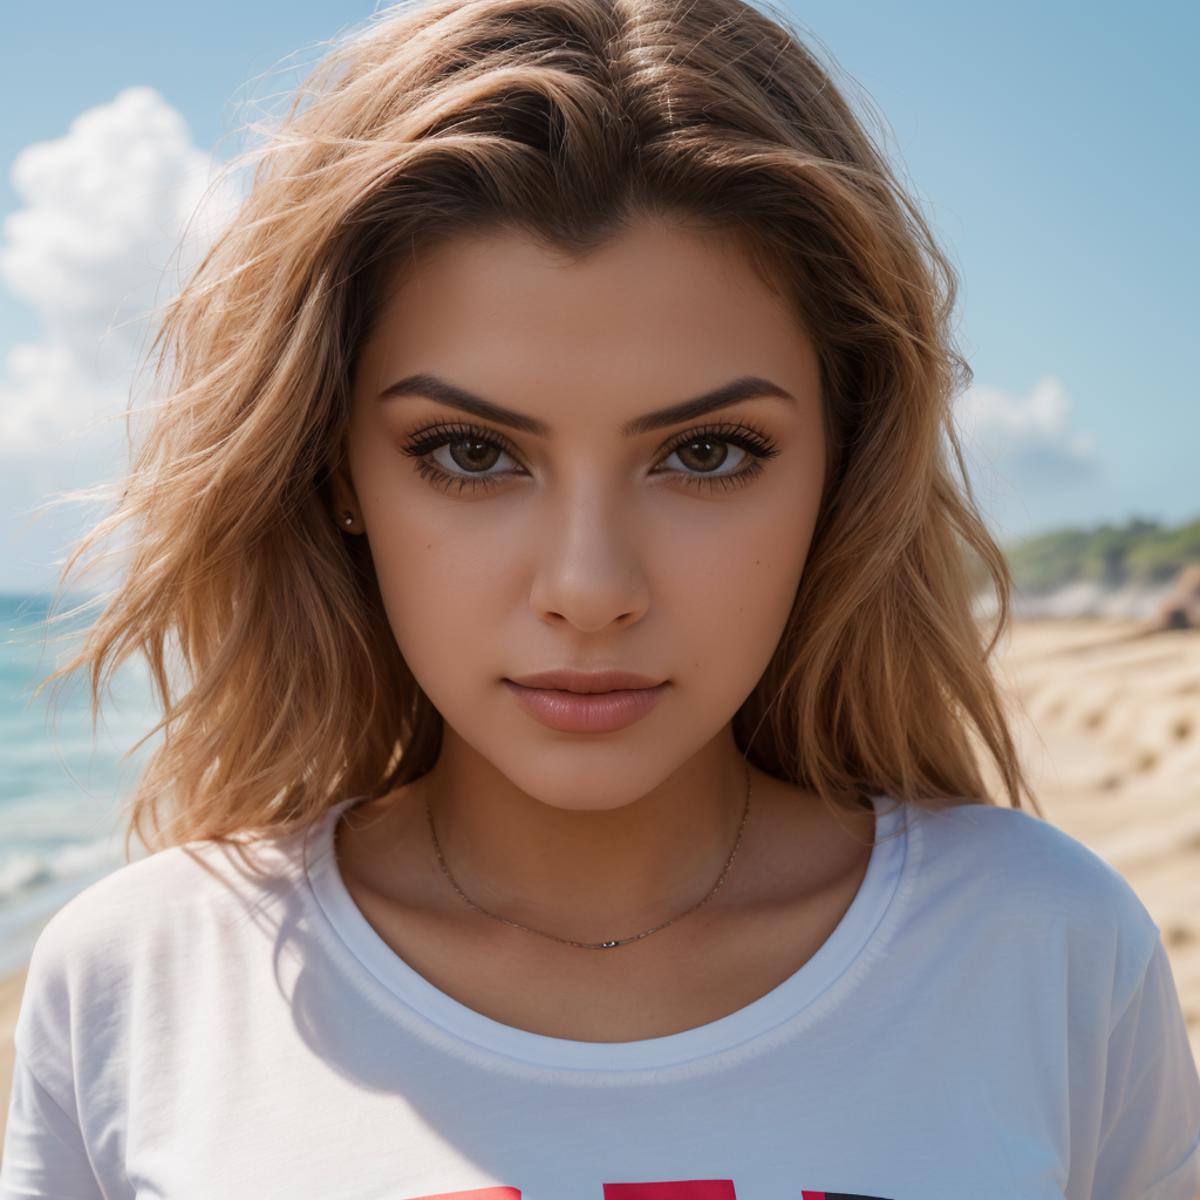 Alissa Violet image by WillieF